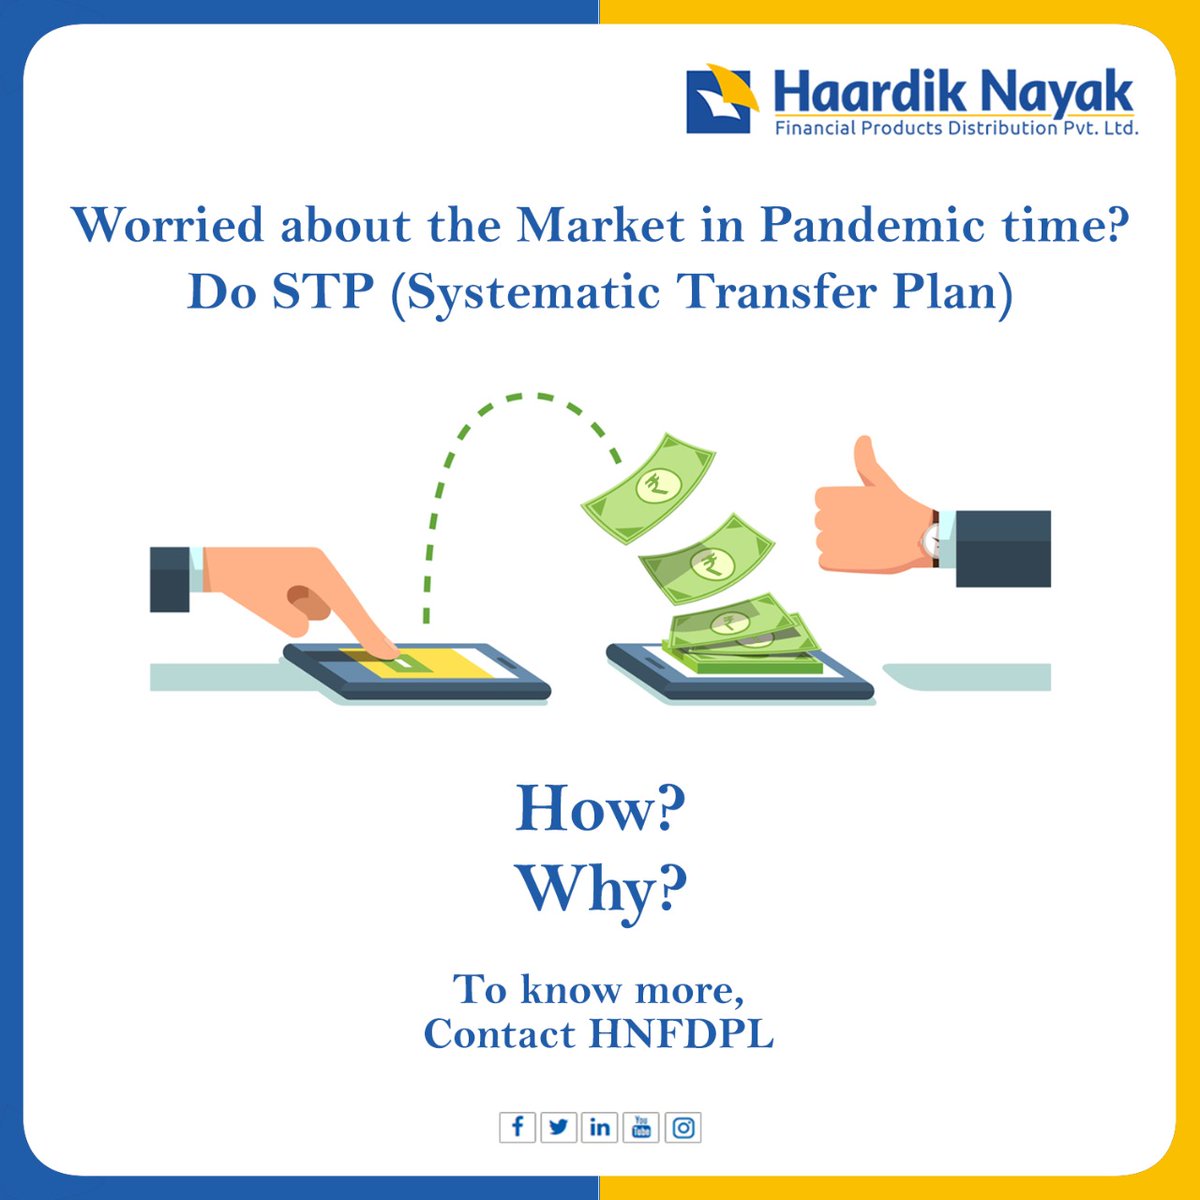 Overcome the current market situation with the Systematic Transfer Plan. Contact Haardik Nayak Financial Products Distribution Pvt. Ltd.
#HaardikNayakFinancialProductDistribution #SystematicTransferPlan #RedeemPlan #FinancialAdvisor #MutualFund #MutualFundAdvisor